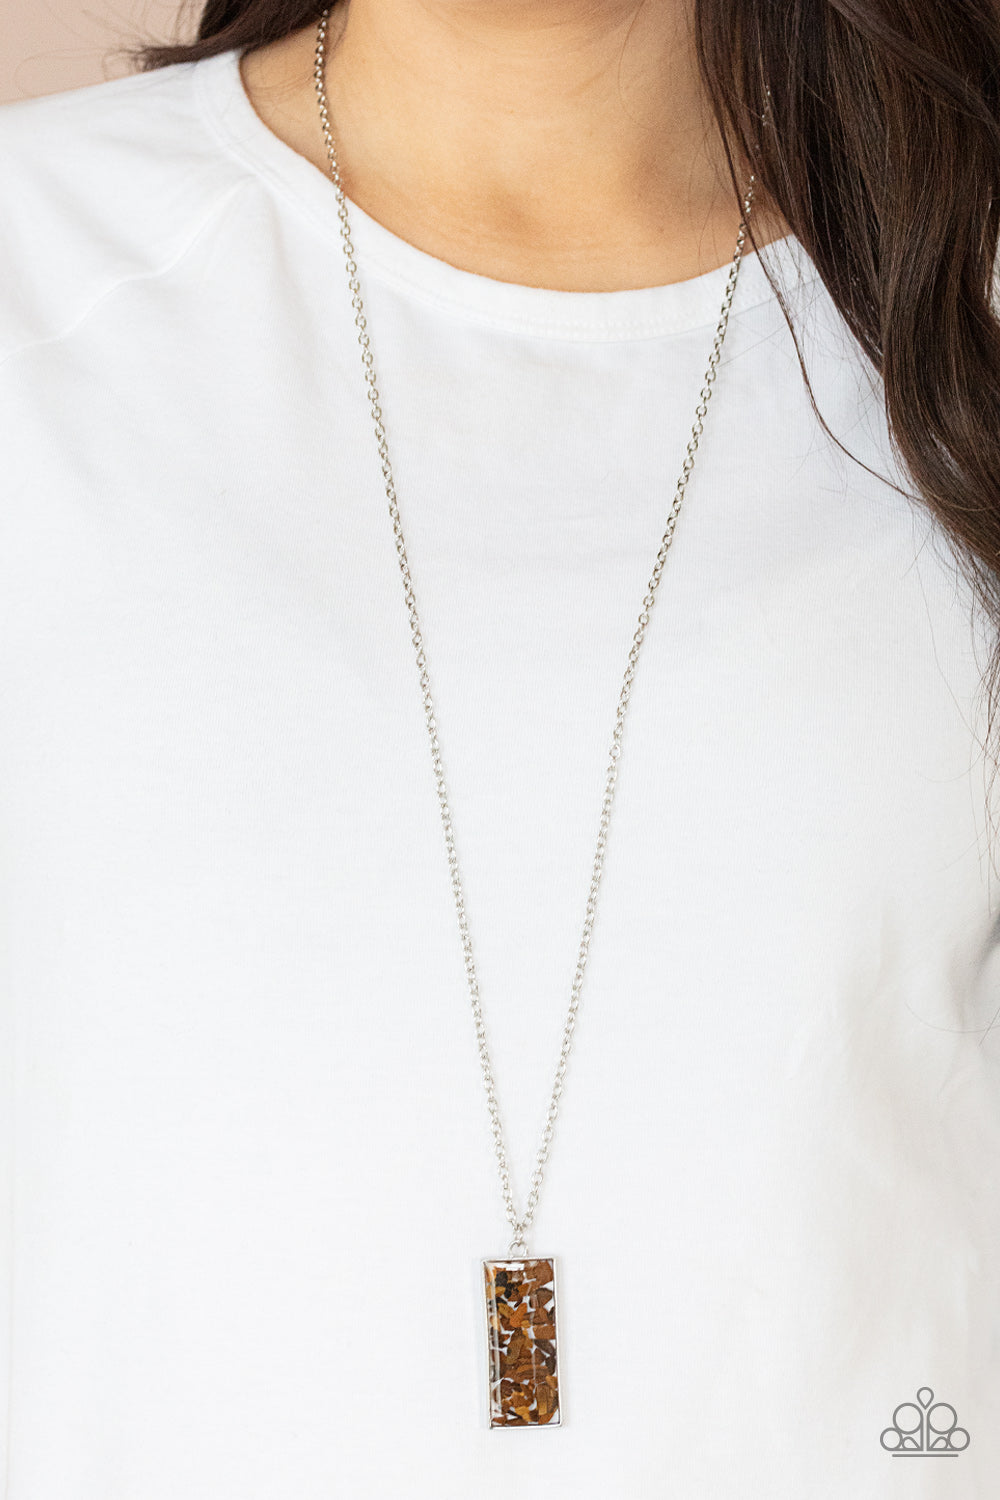 Retro Rock Collection Necklace (Brown, White)